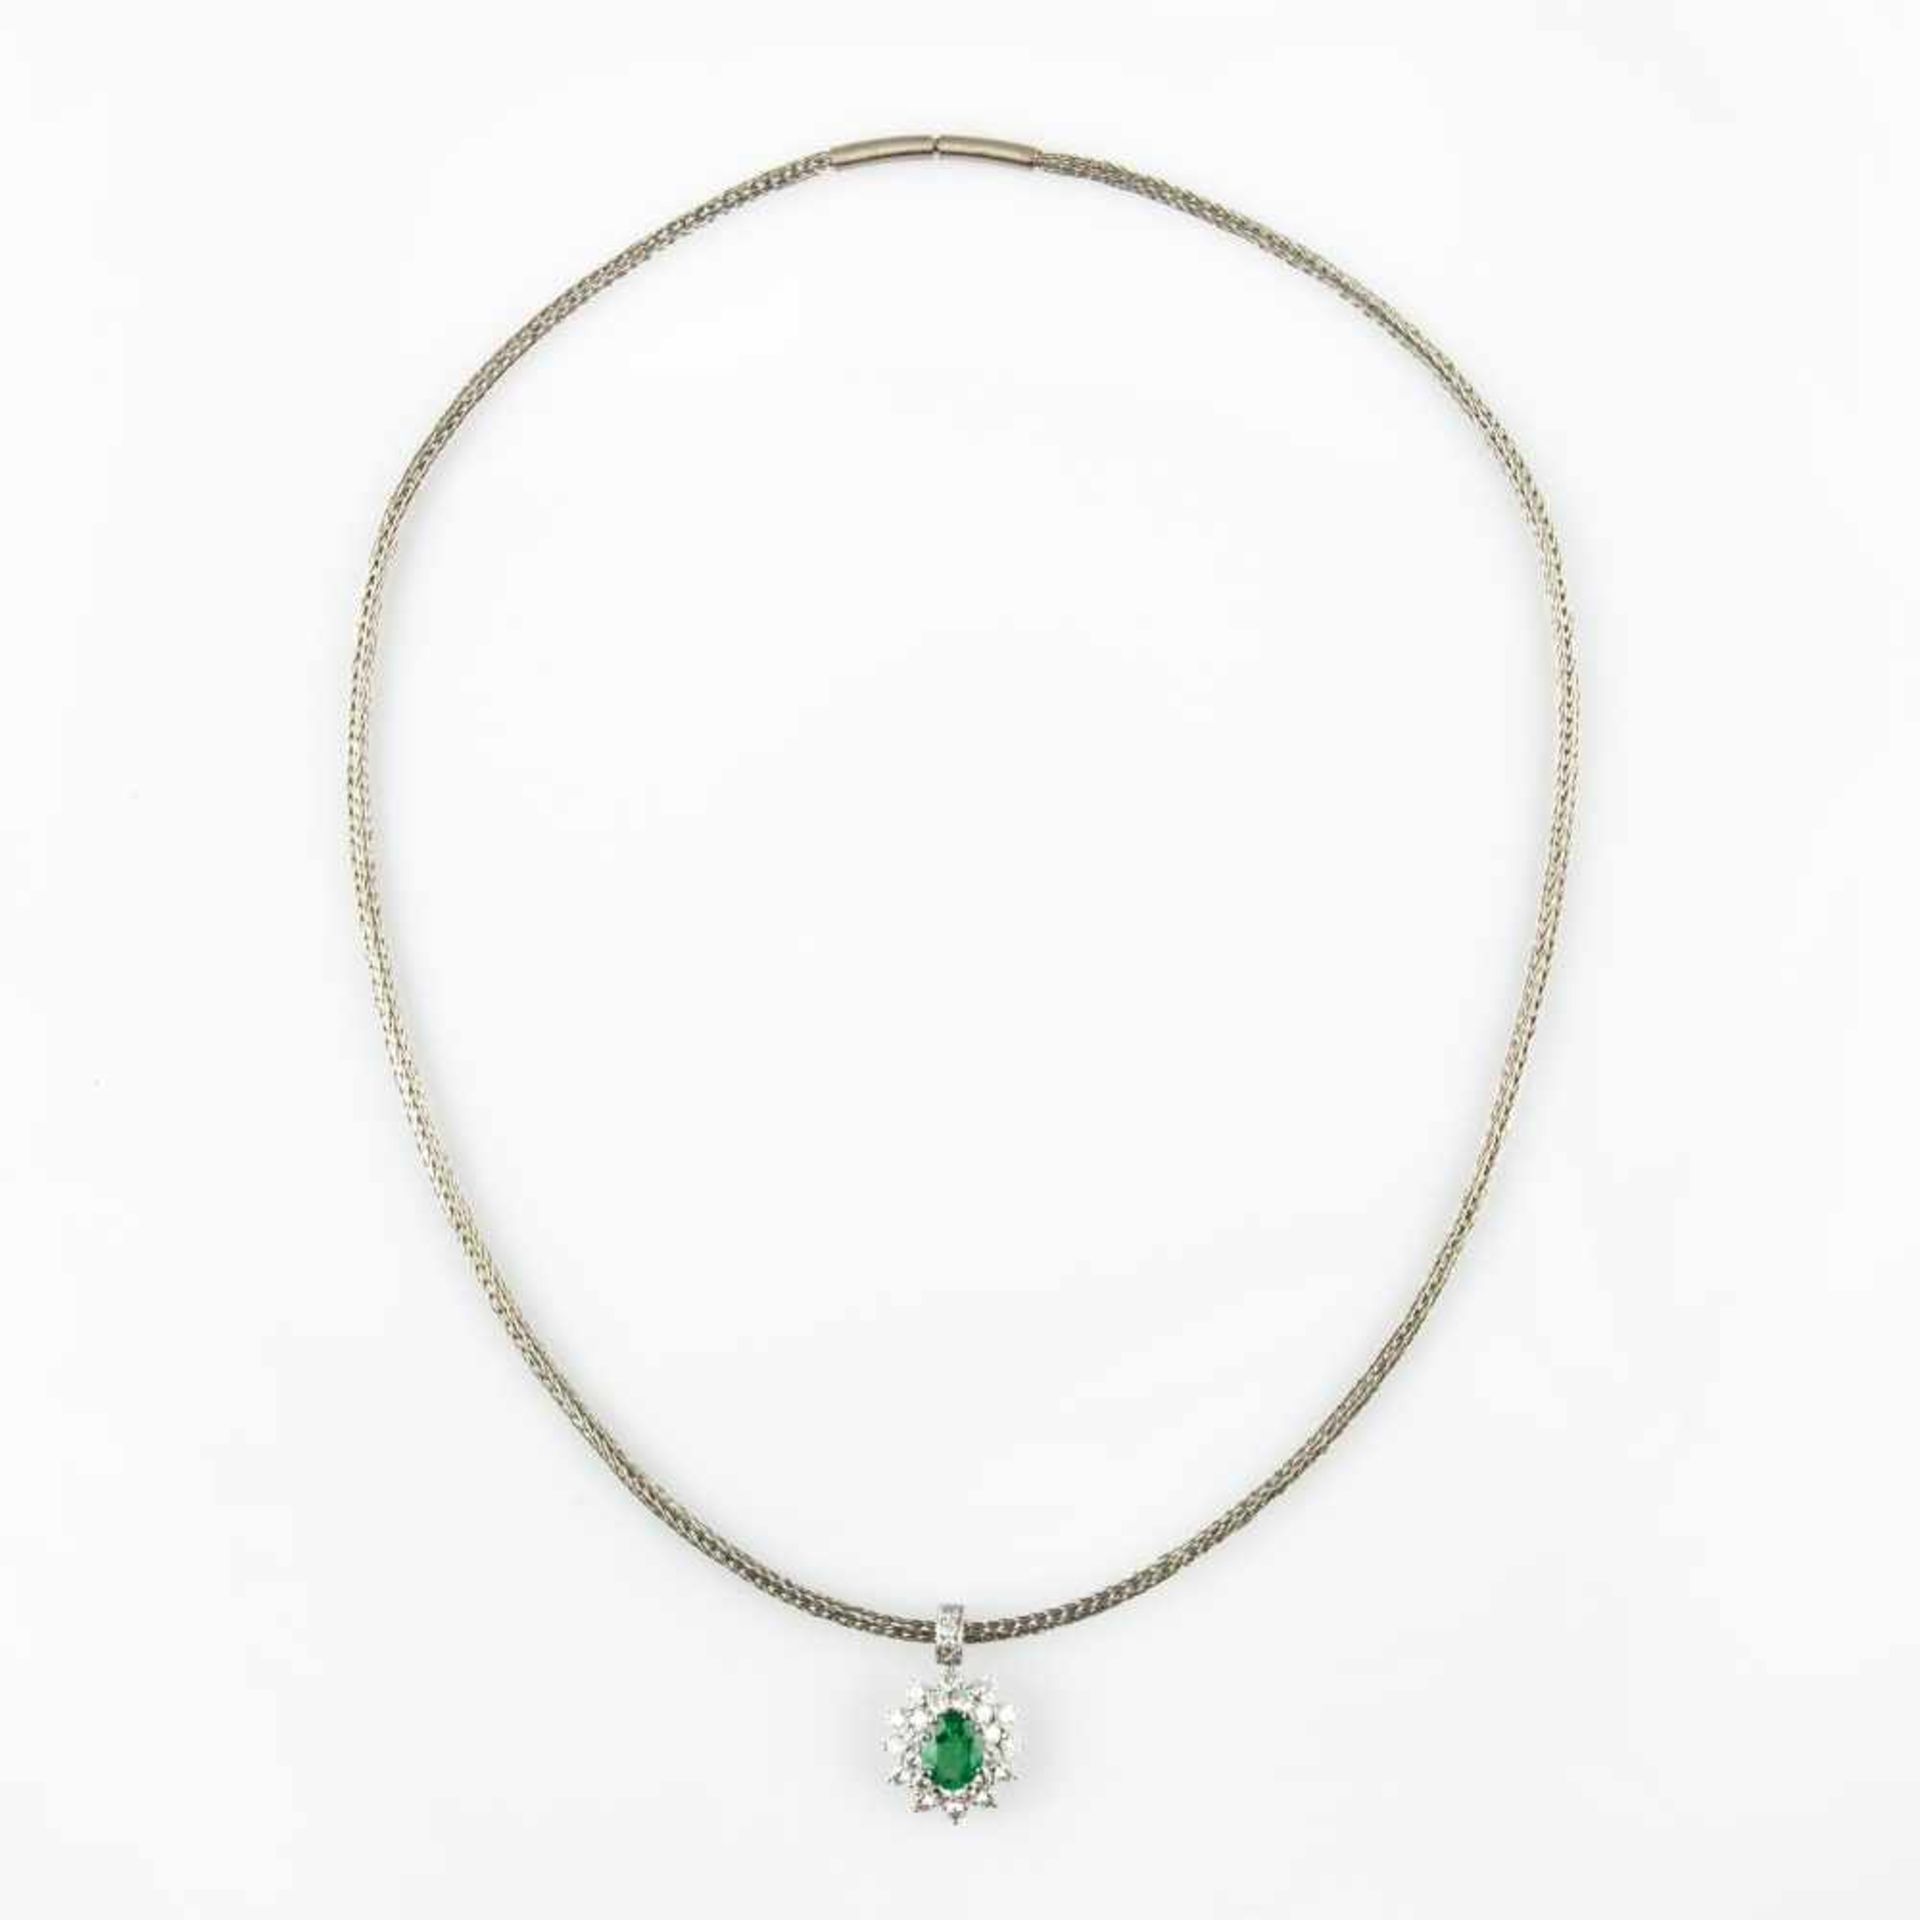 Necklace with emerald pendant